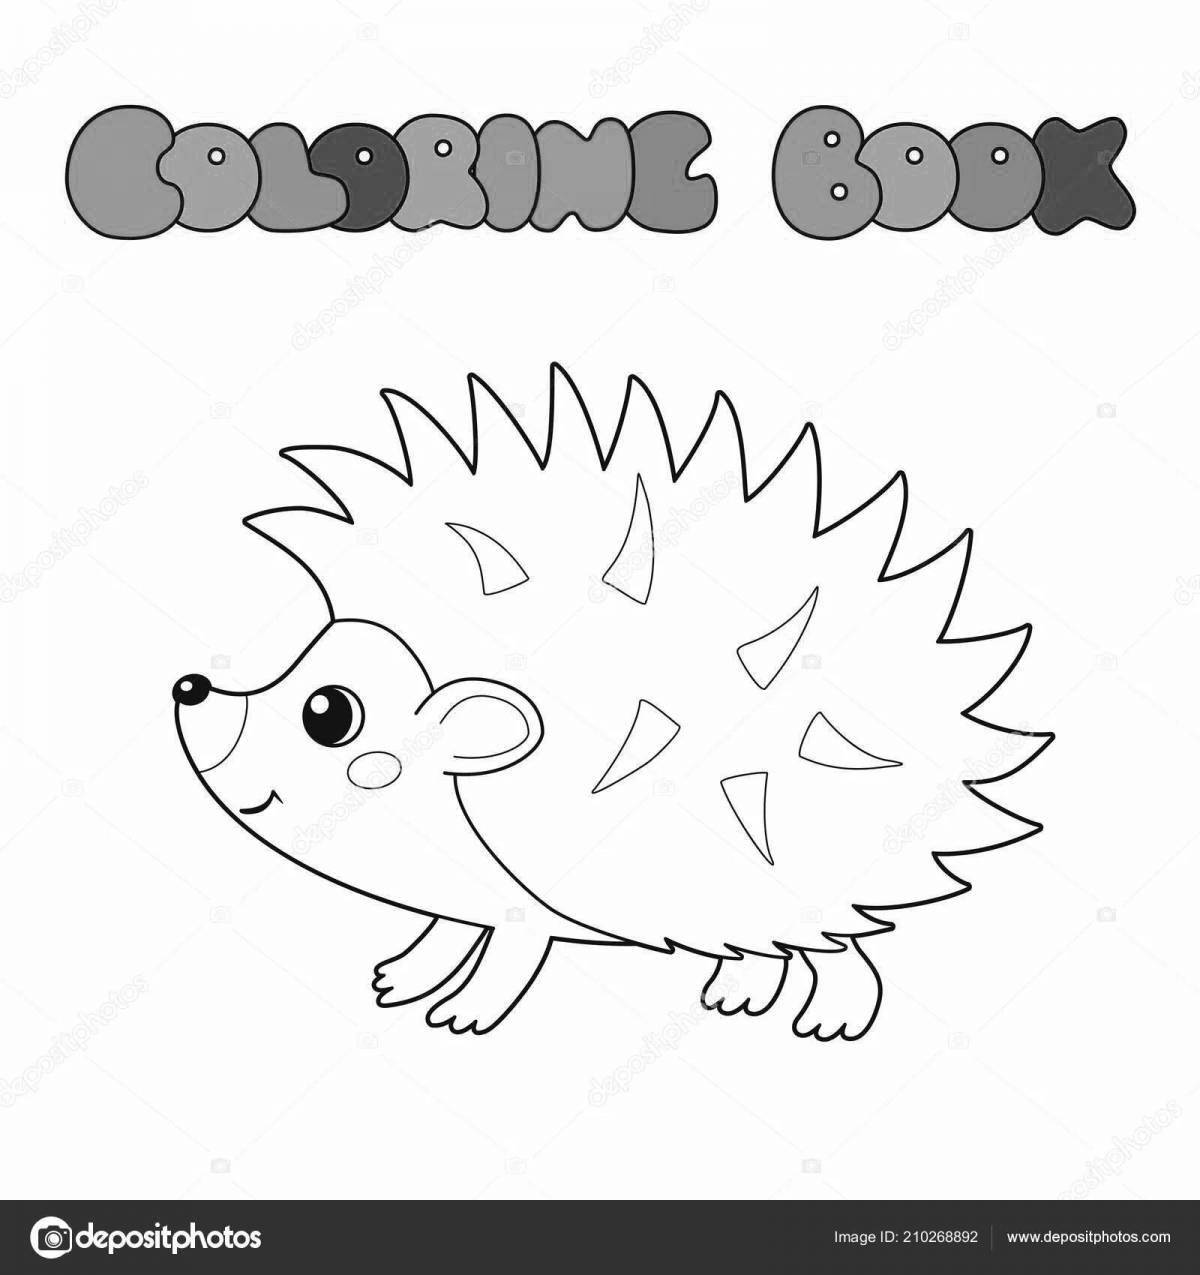 Bubble coloring hedgehog without thorns